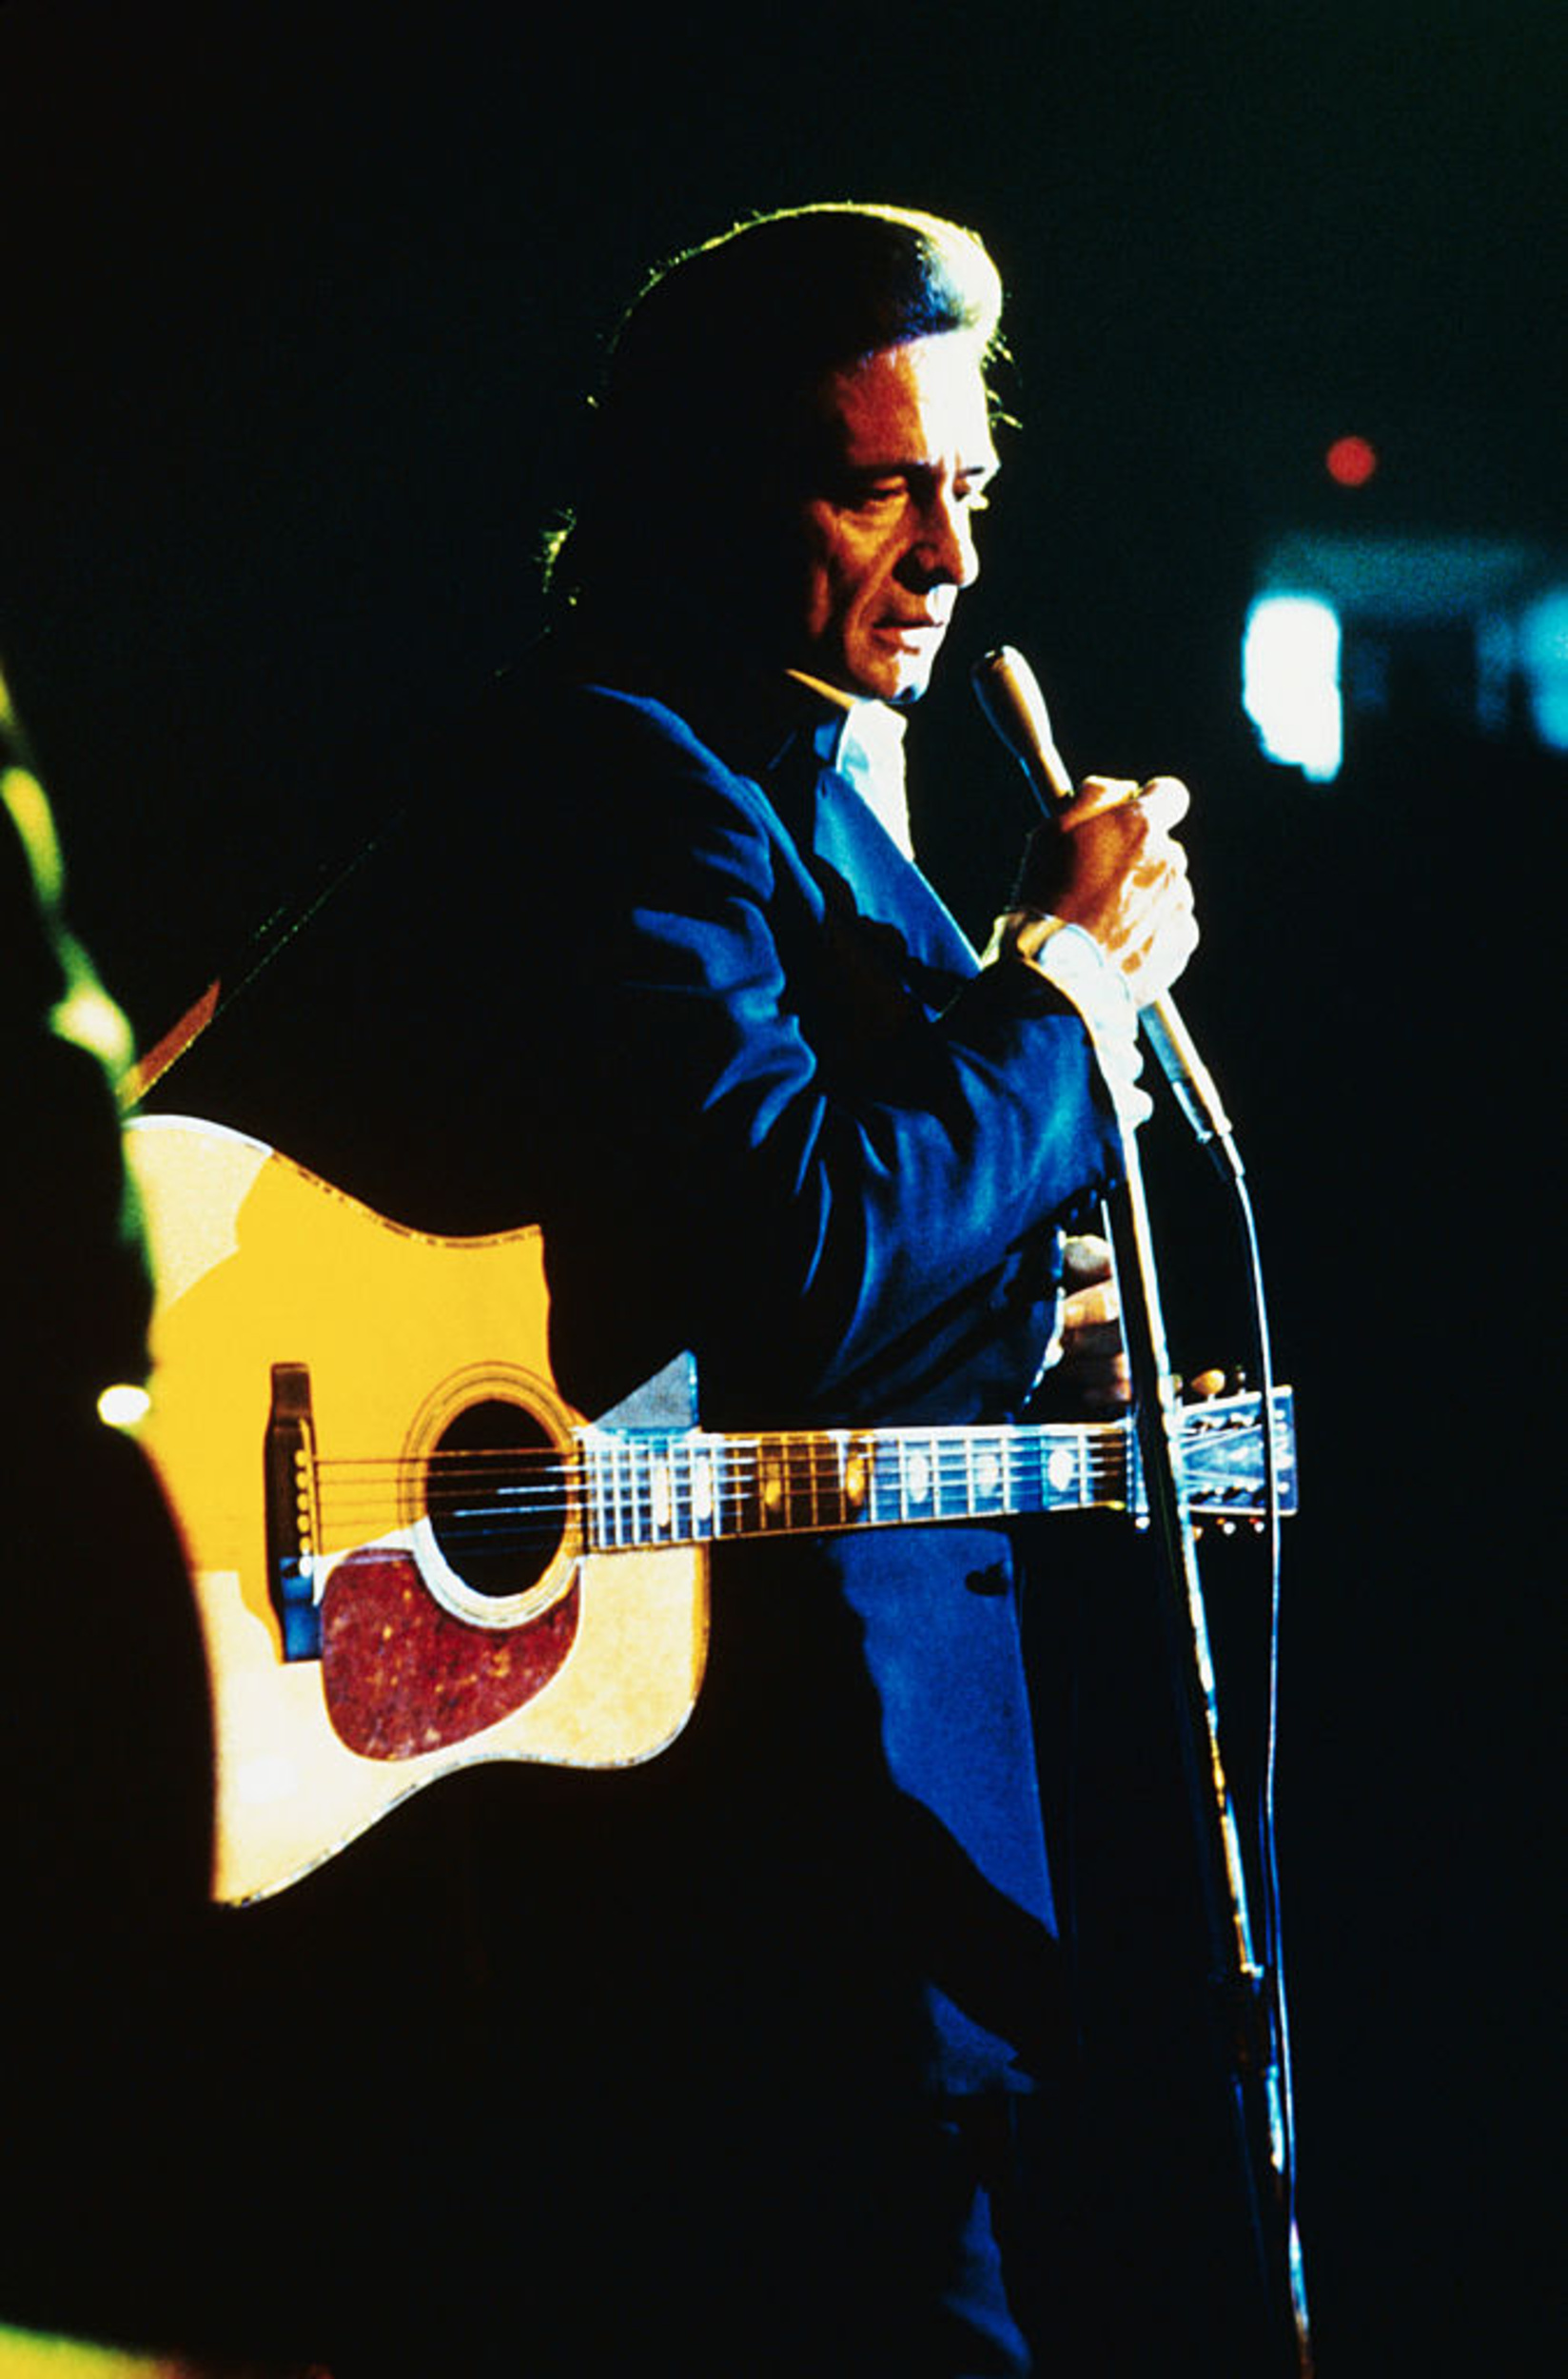 <p>Johnny Cash lists off too many American destinations to count in "I've Been Everywhere," making it an obvious addition to the soundtrack for a great American road trip. Even if you're not going to Dayton, Ohio or Tulsa, Oklahoma, the appeal of this song is totally universal. </p><p>You may also like: <a href='https://www.yardbarker.com/entertainment/articles/25_underrated_war_movies_121423/s1__39068935'>25 underrated war movies</a></p>